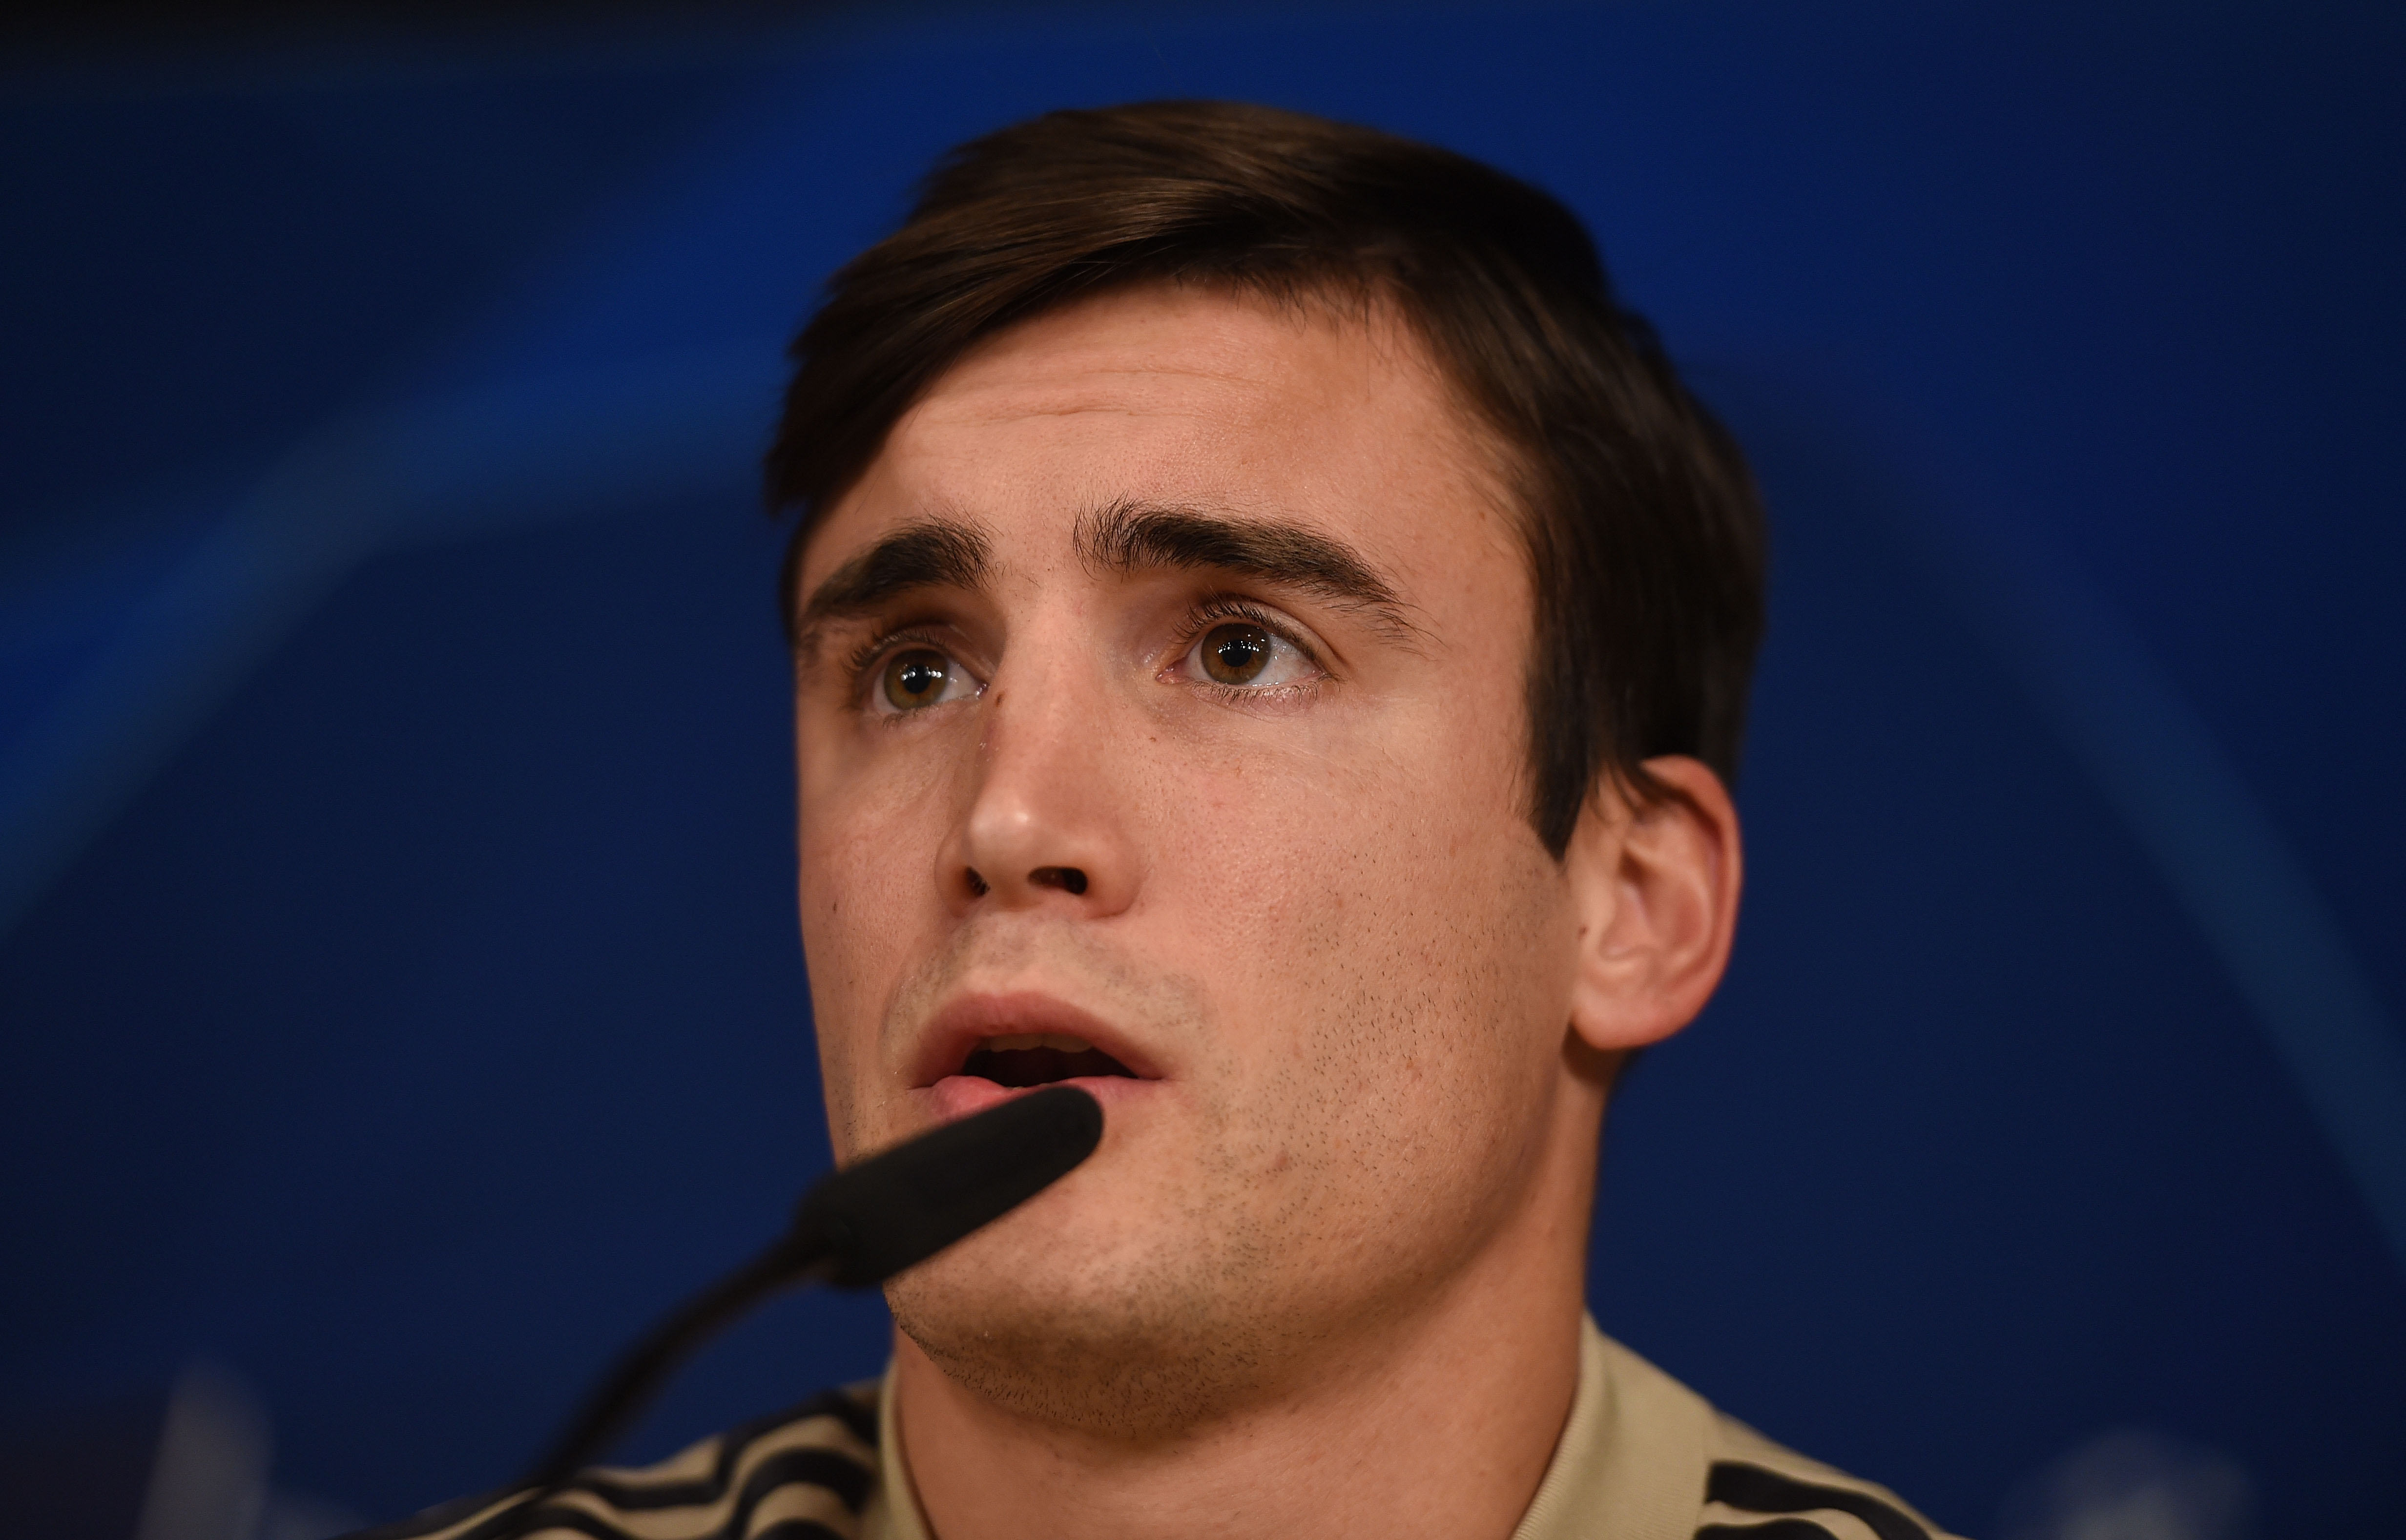 MADRID, SPAIN - MARCH 04:  Nicolas Tagliafico of Ajax gives his press conference ahead the UEFA Champions League Round of 16 Second Leg match of the UEFA Champions League between Real Madrid and Ajax at estadio Santiago Bernabeu on March 04, 2019 in Madrid, Spain. (Photo by Denis Doyle/Getty Images)